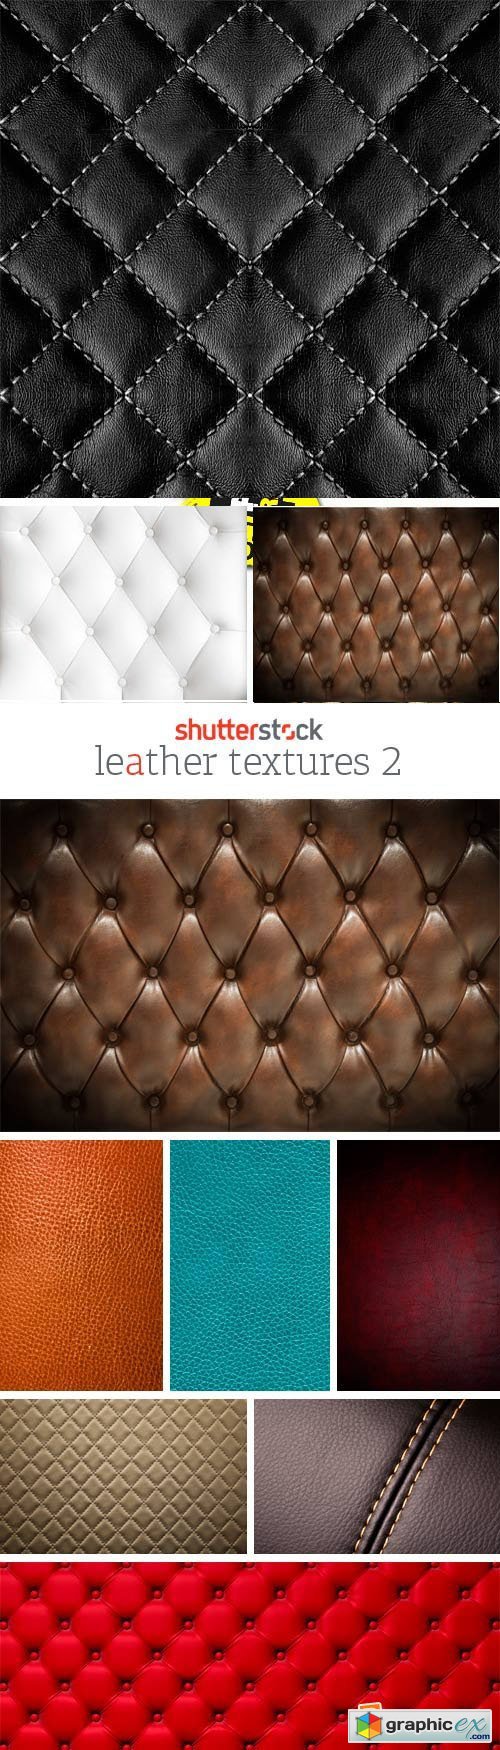 Amazing SS - Leather Textures 2, 25xJPGs